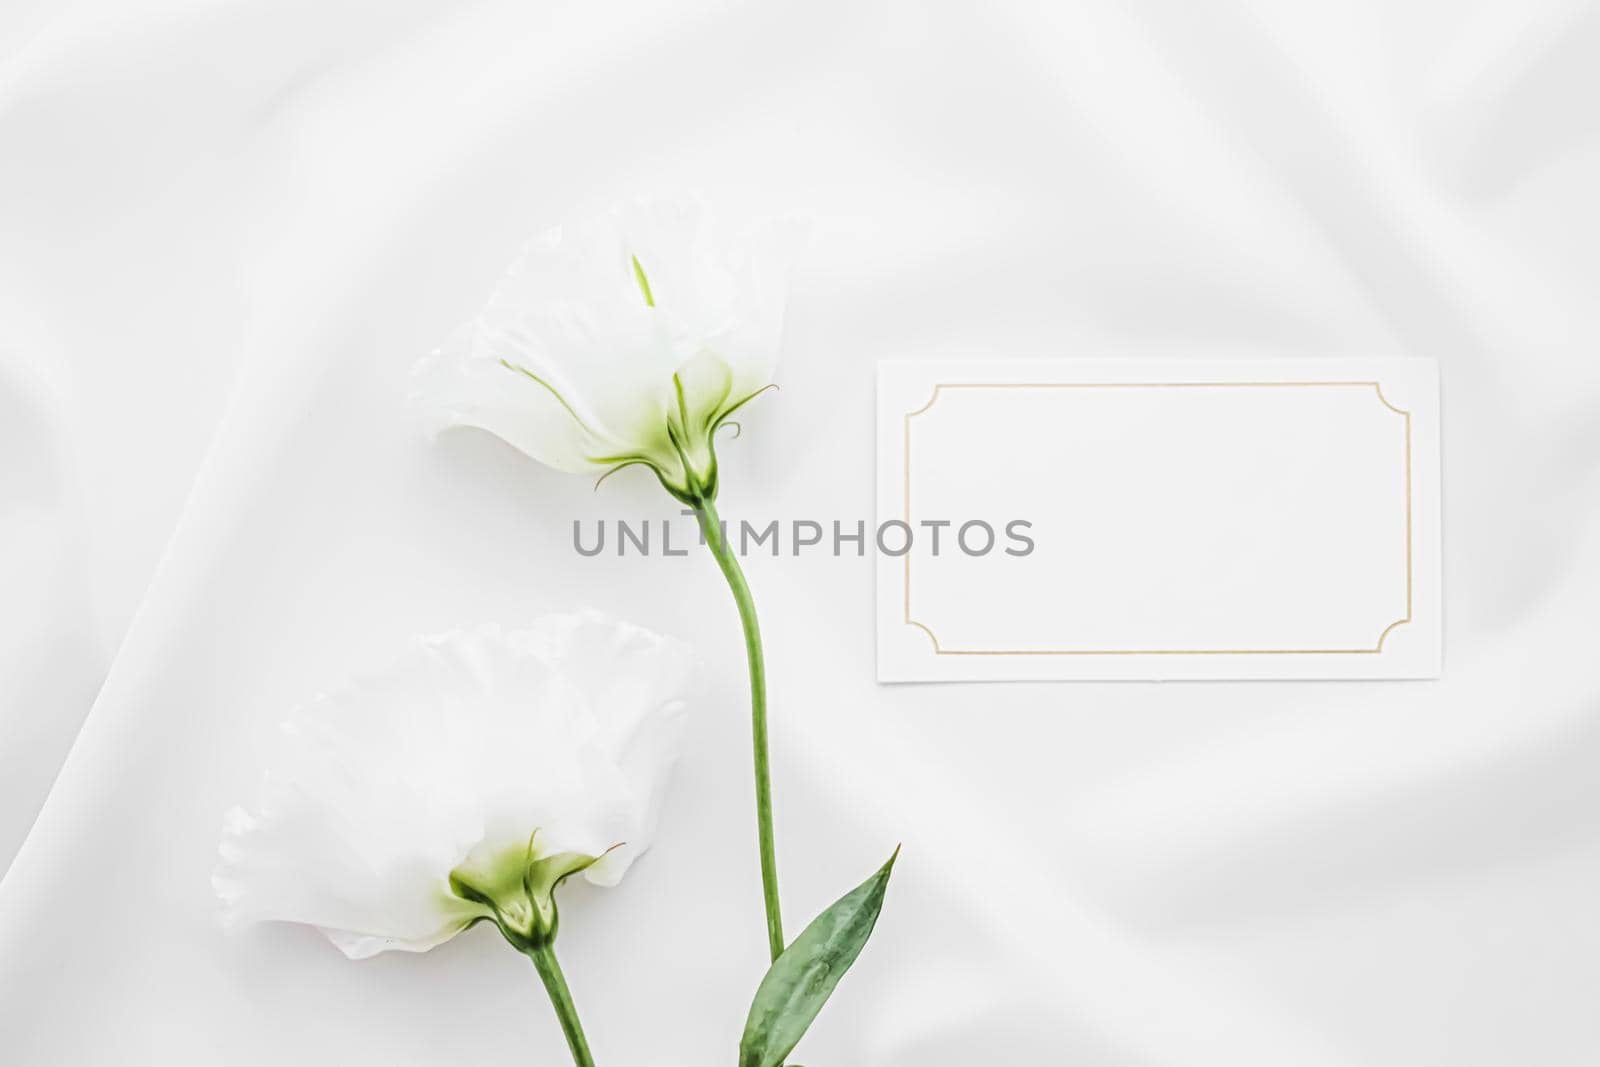 Wedding invitation or gift card and white rose flowers on silk fabric as bridal flatlay background, blank paper and holiday branding, flat lay design by Anneleven